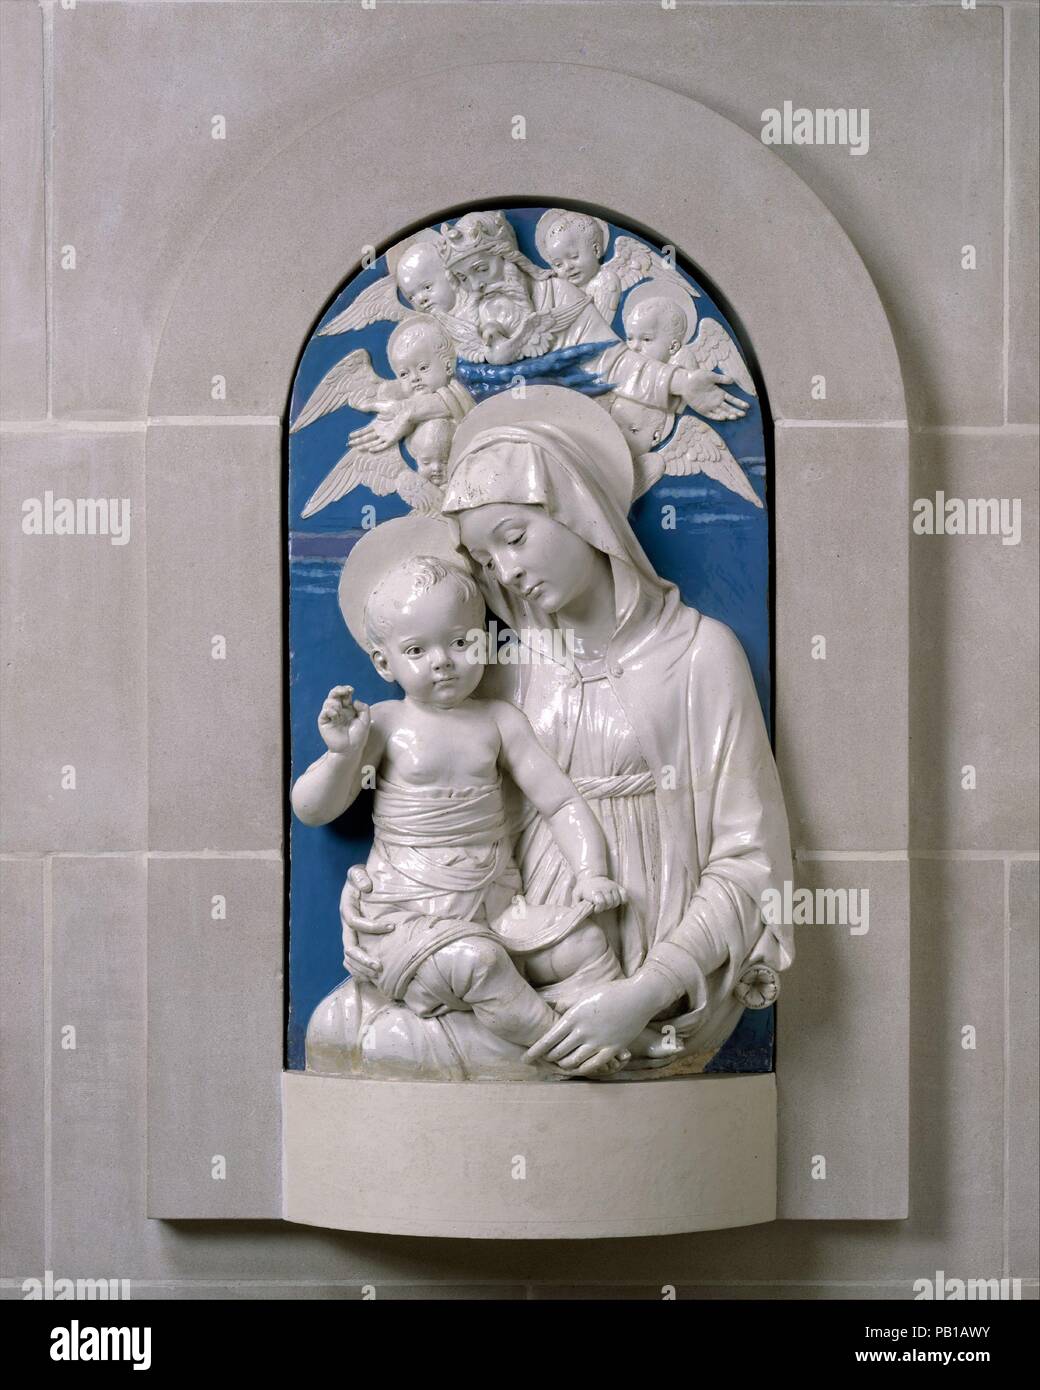 Virgin and Child. Artist: Andrea della Robbia (Italian, 1435-1525). Culture: Italian, Florence. Dimensions: 37 3/8 x 21 5/8 in.  (94.9 x 54.9 cm). Date: ca. 1470-75.  Andrea was the nephew and disciple of Luca della Robbia, who developed the blue and white glazes used on terracotta sculpture with which the name della Robbia is associated. By the time he made the Lehman Madonna, about 1470-75, Andrea had for some years been chiefly responsible for the output of the family shop in the via Guelfa, Florence.  Although he was a faithful follower of his uncle's style, his own personality emerged in  Stock Photo